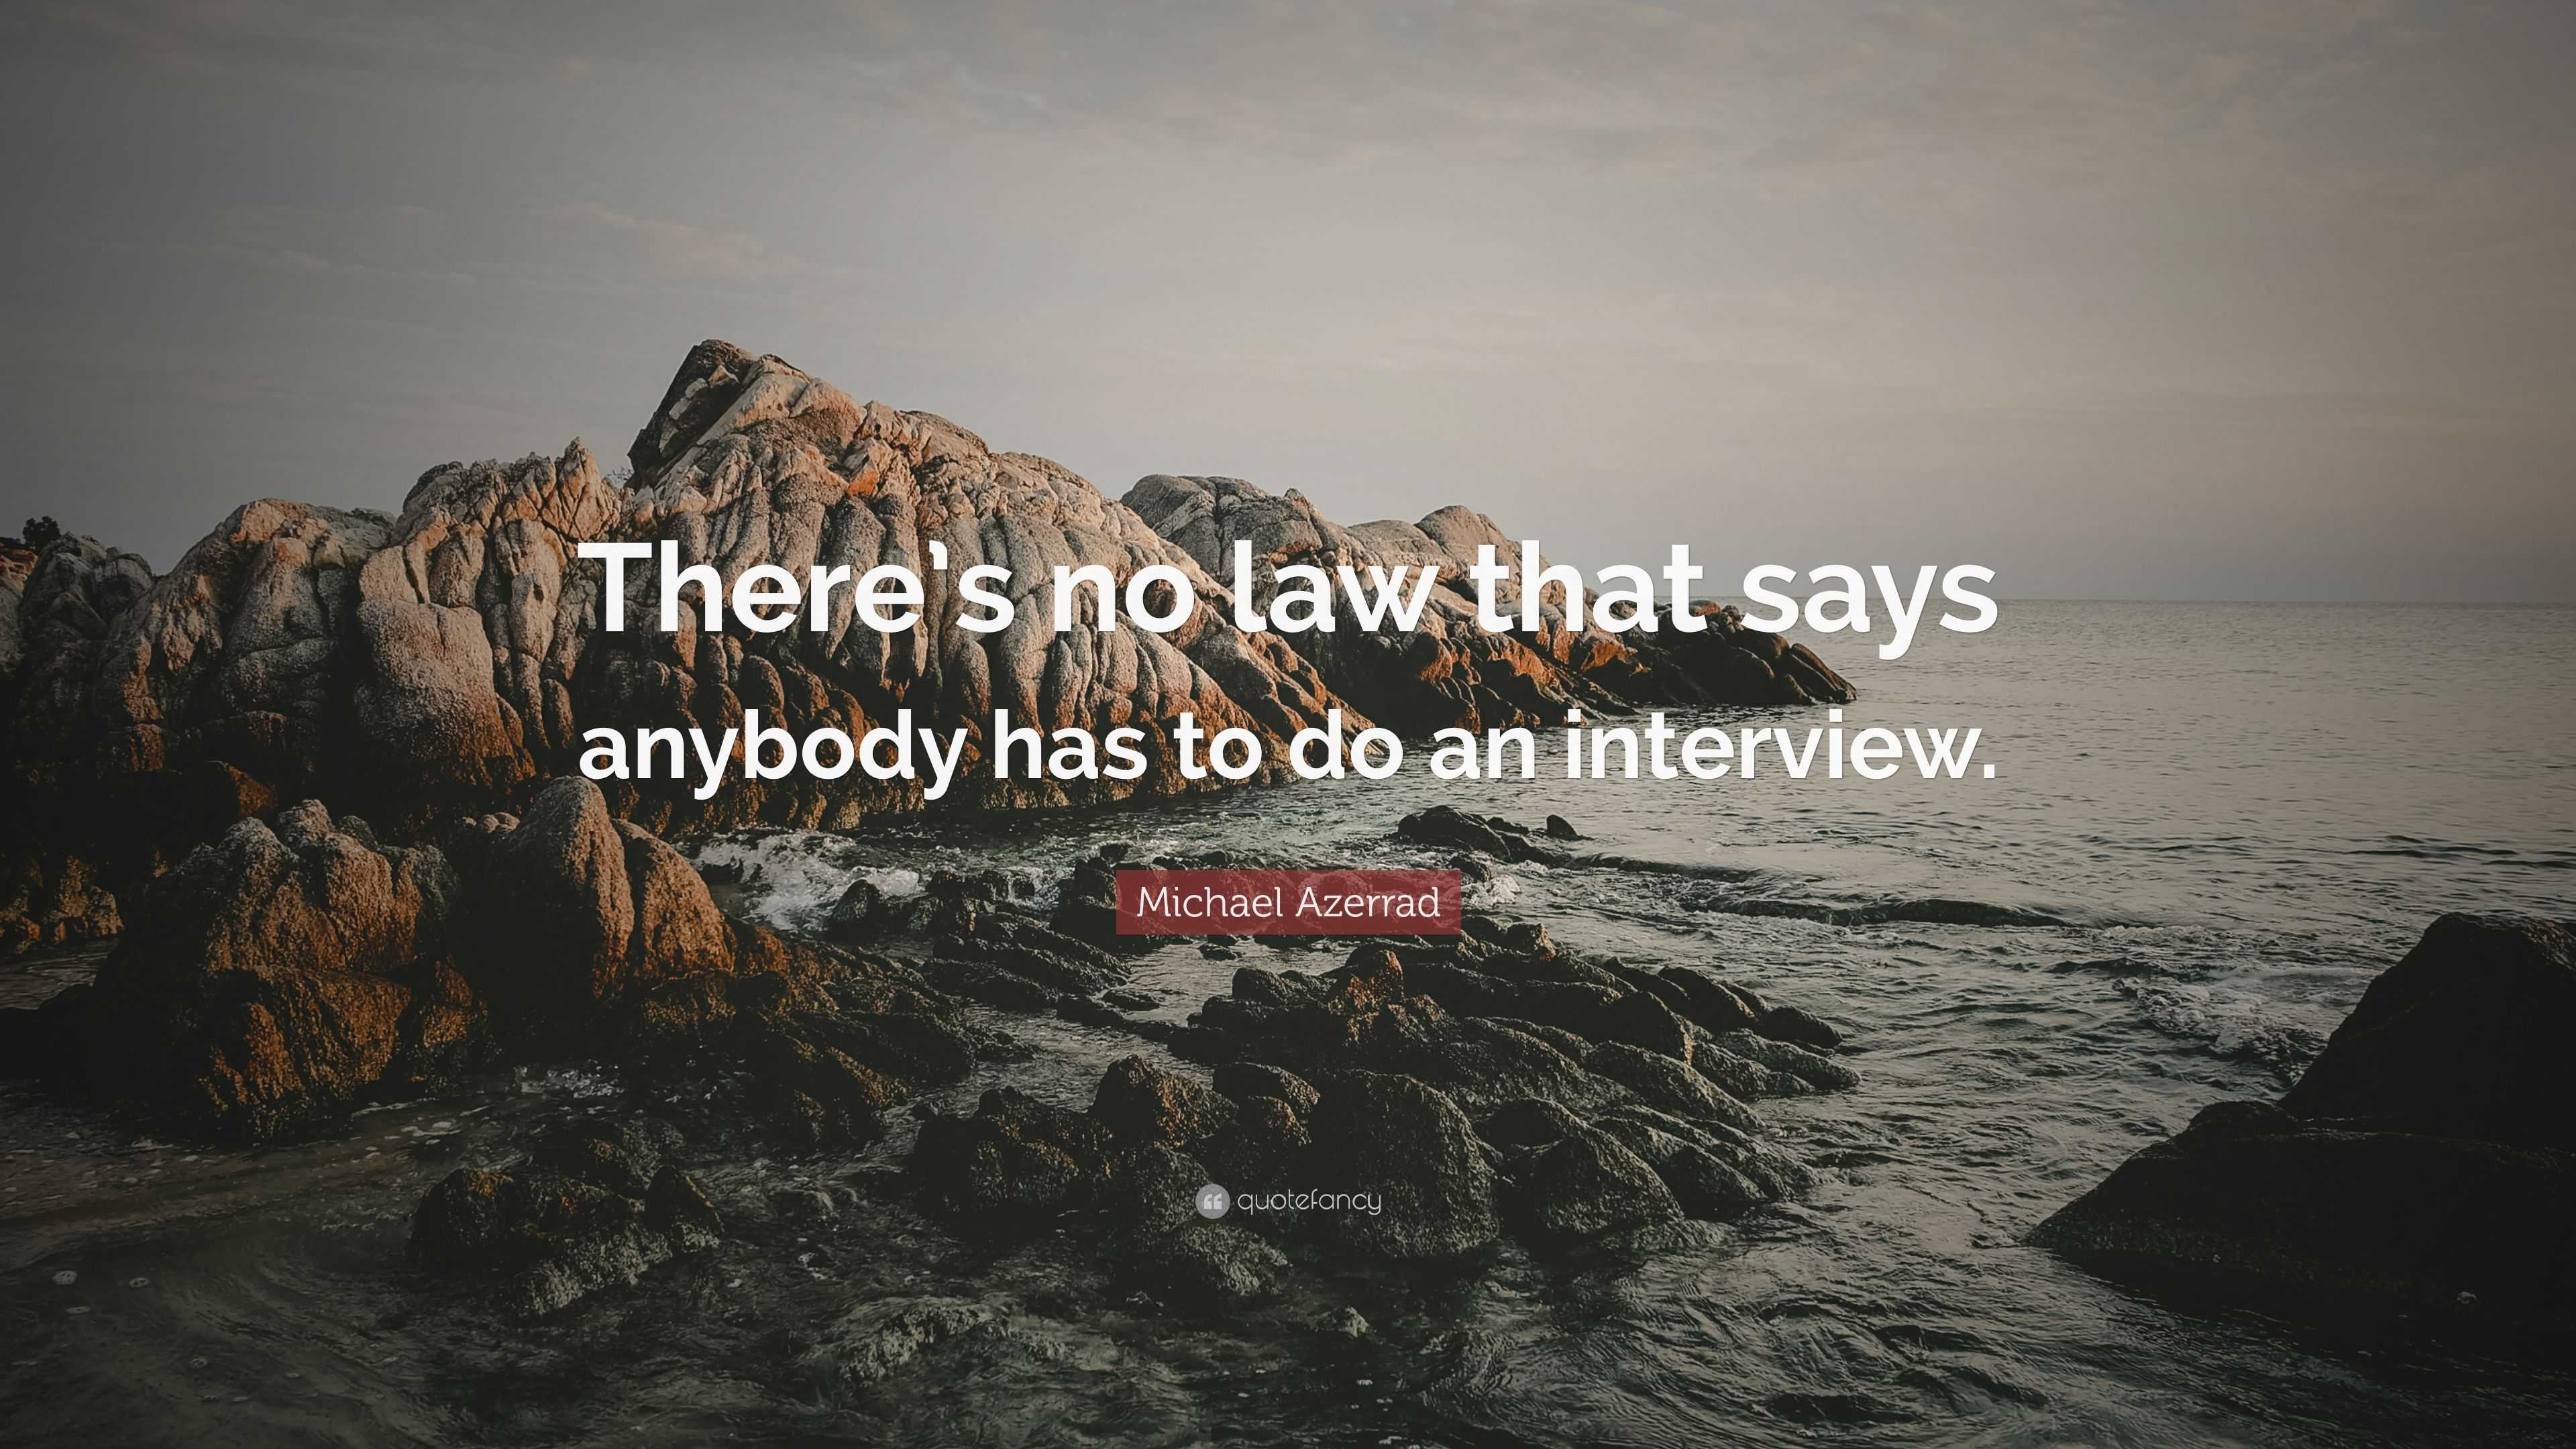 Michael Azerrad Quote “theres No Law That Says Anybody Has To Do An Interview” 3777